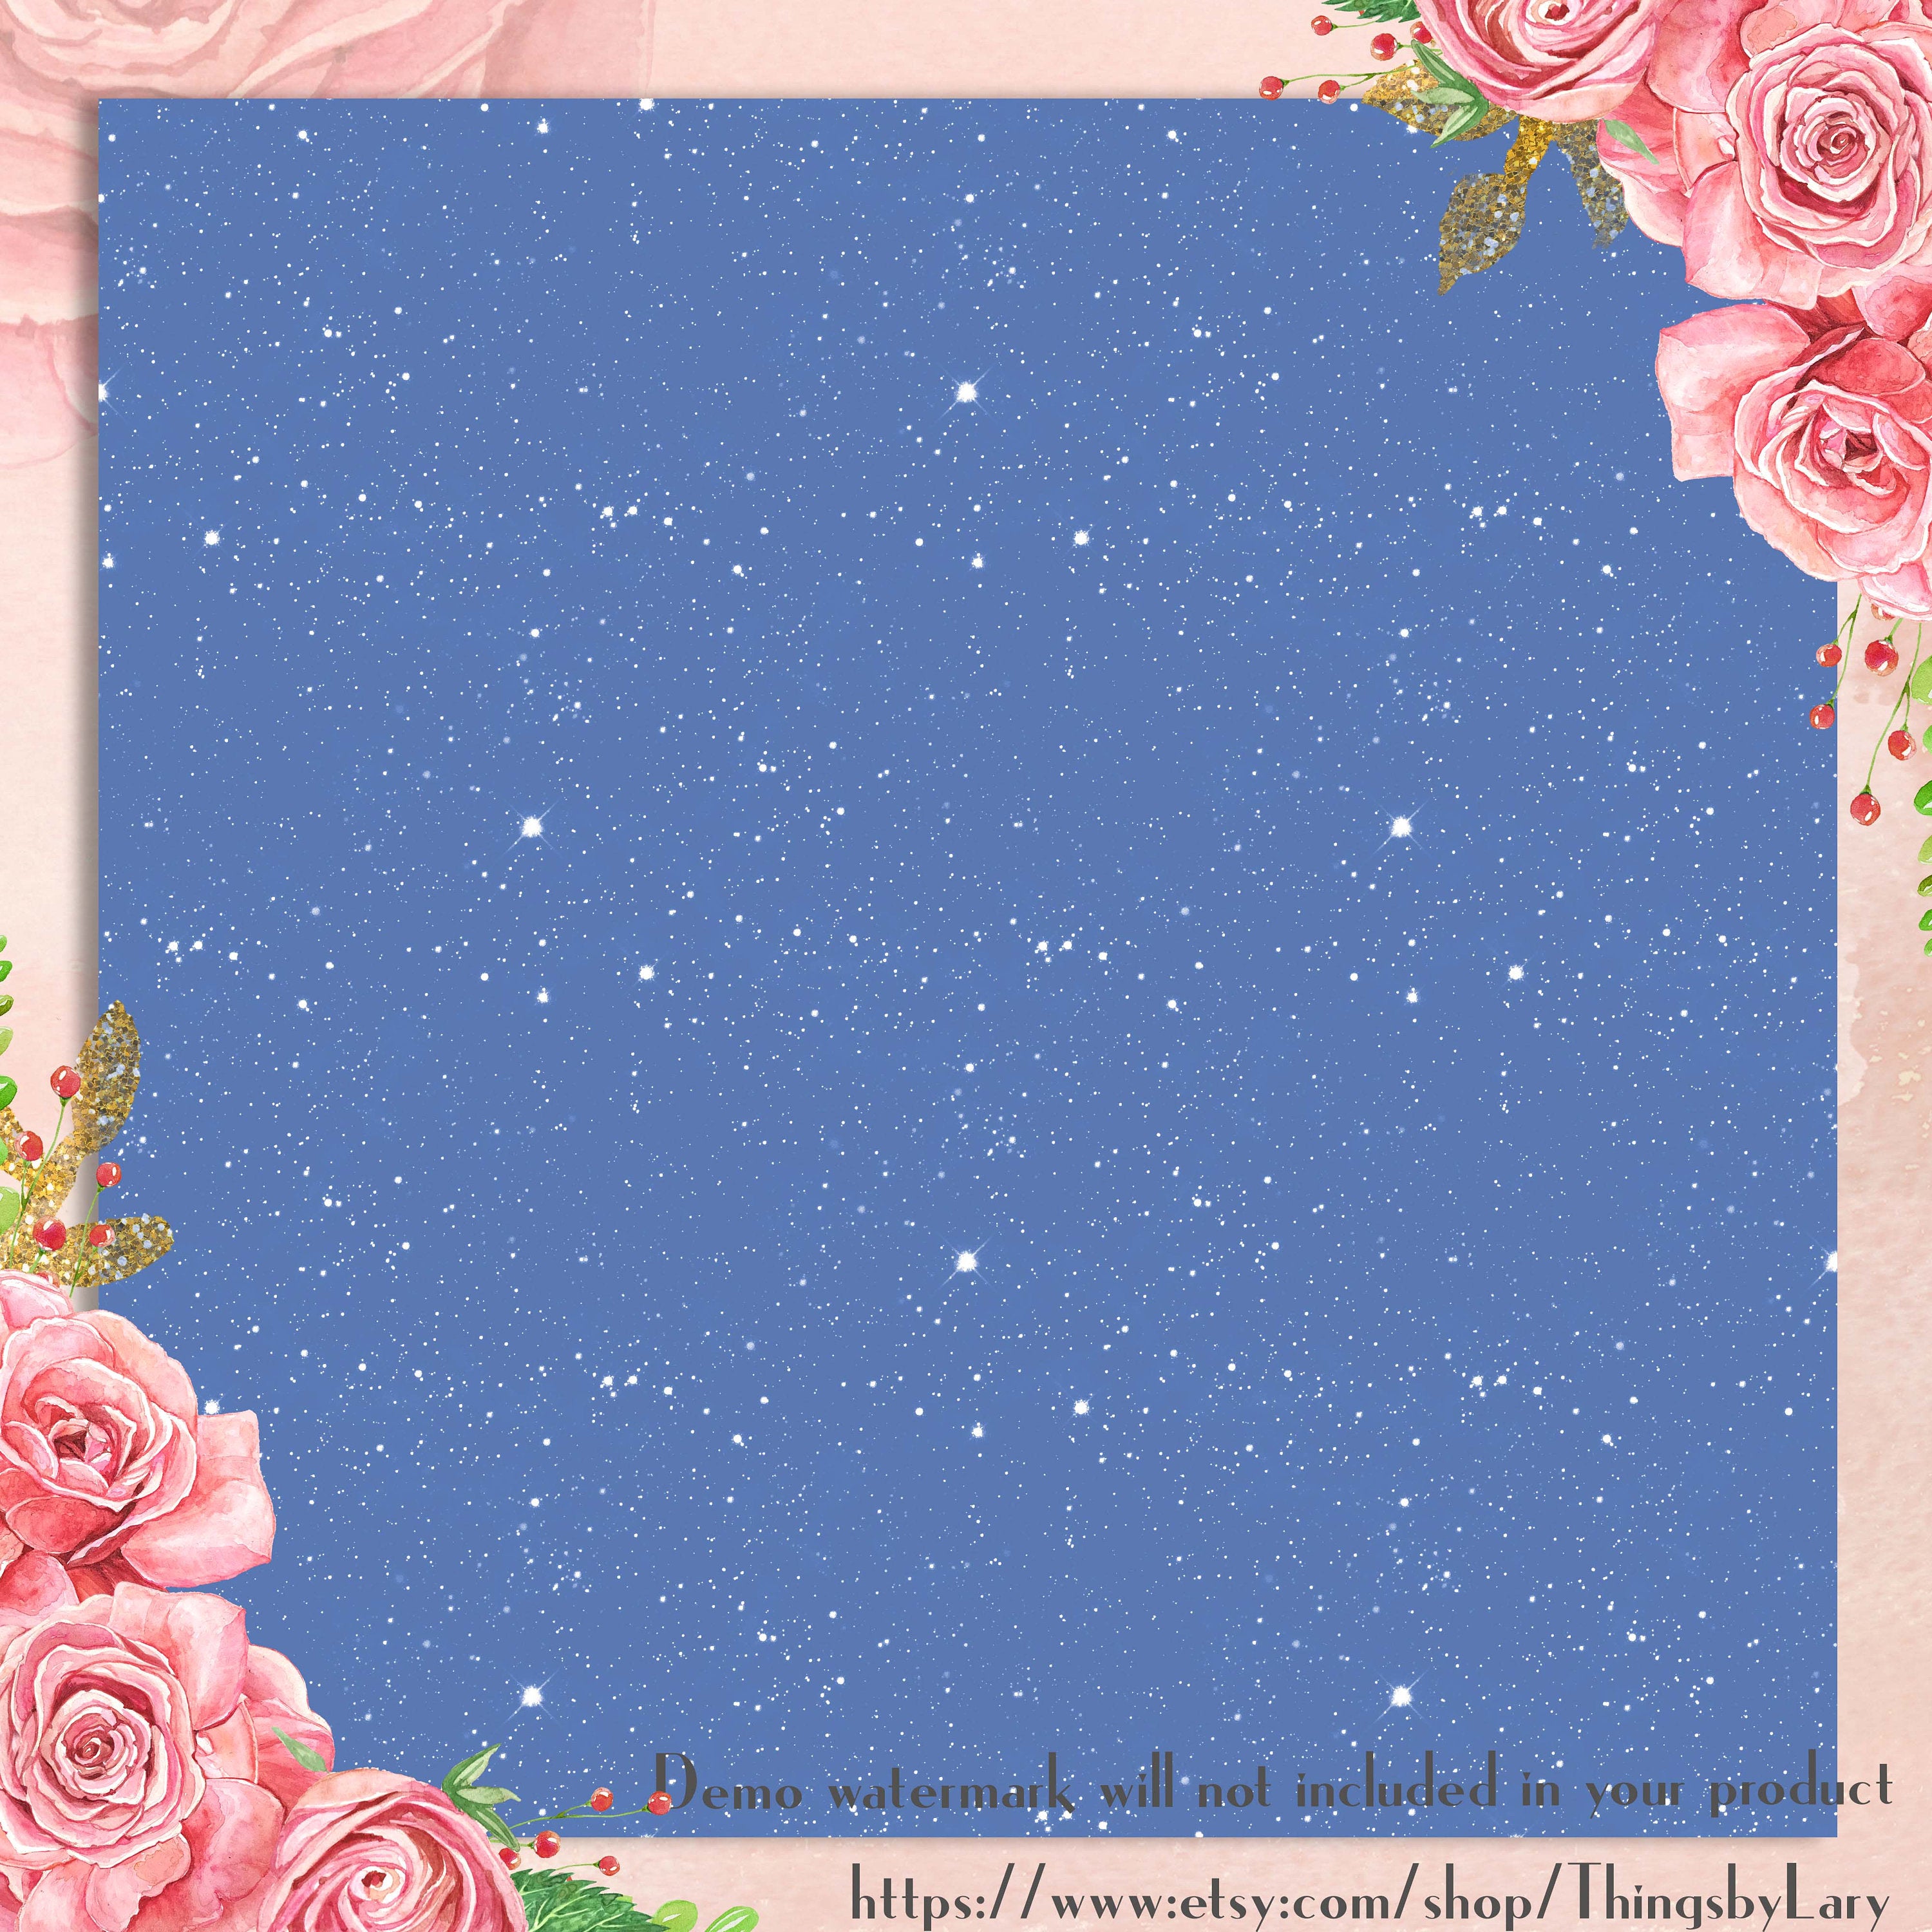 100 Seamless Starry Night Papers in 12inch,300 Dpi Planner Paper,Scrapbook Paper,Rainbow Paper,Vintage Papers,Seamless Starry Papers